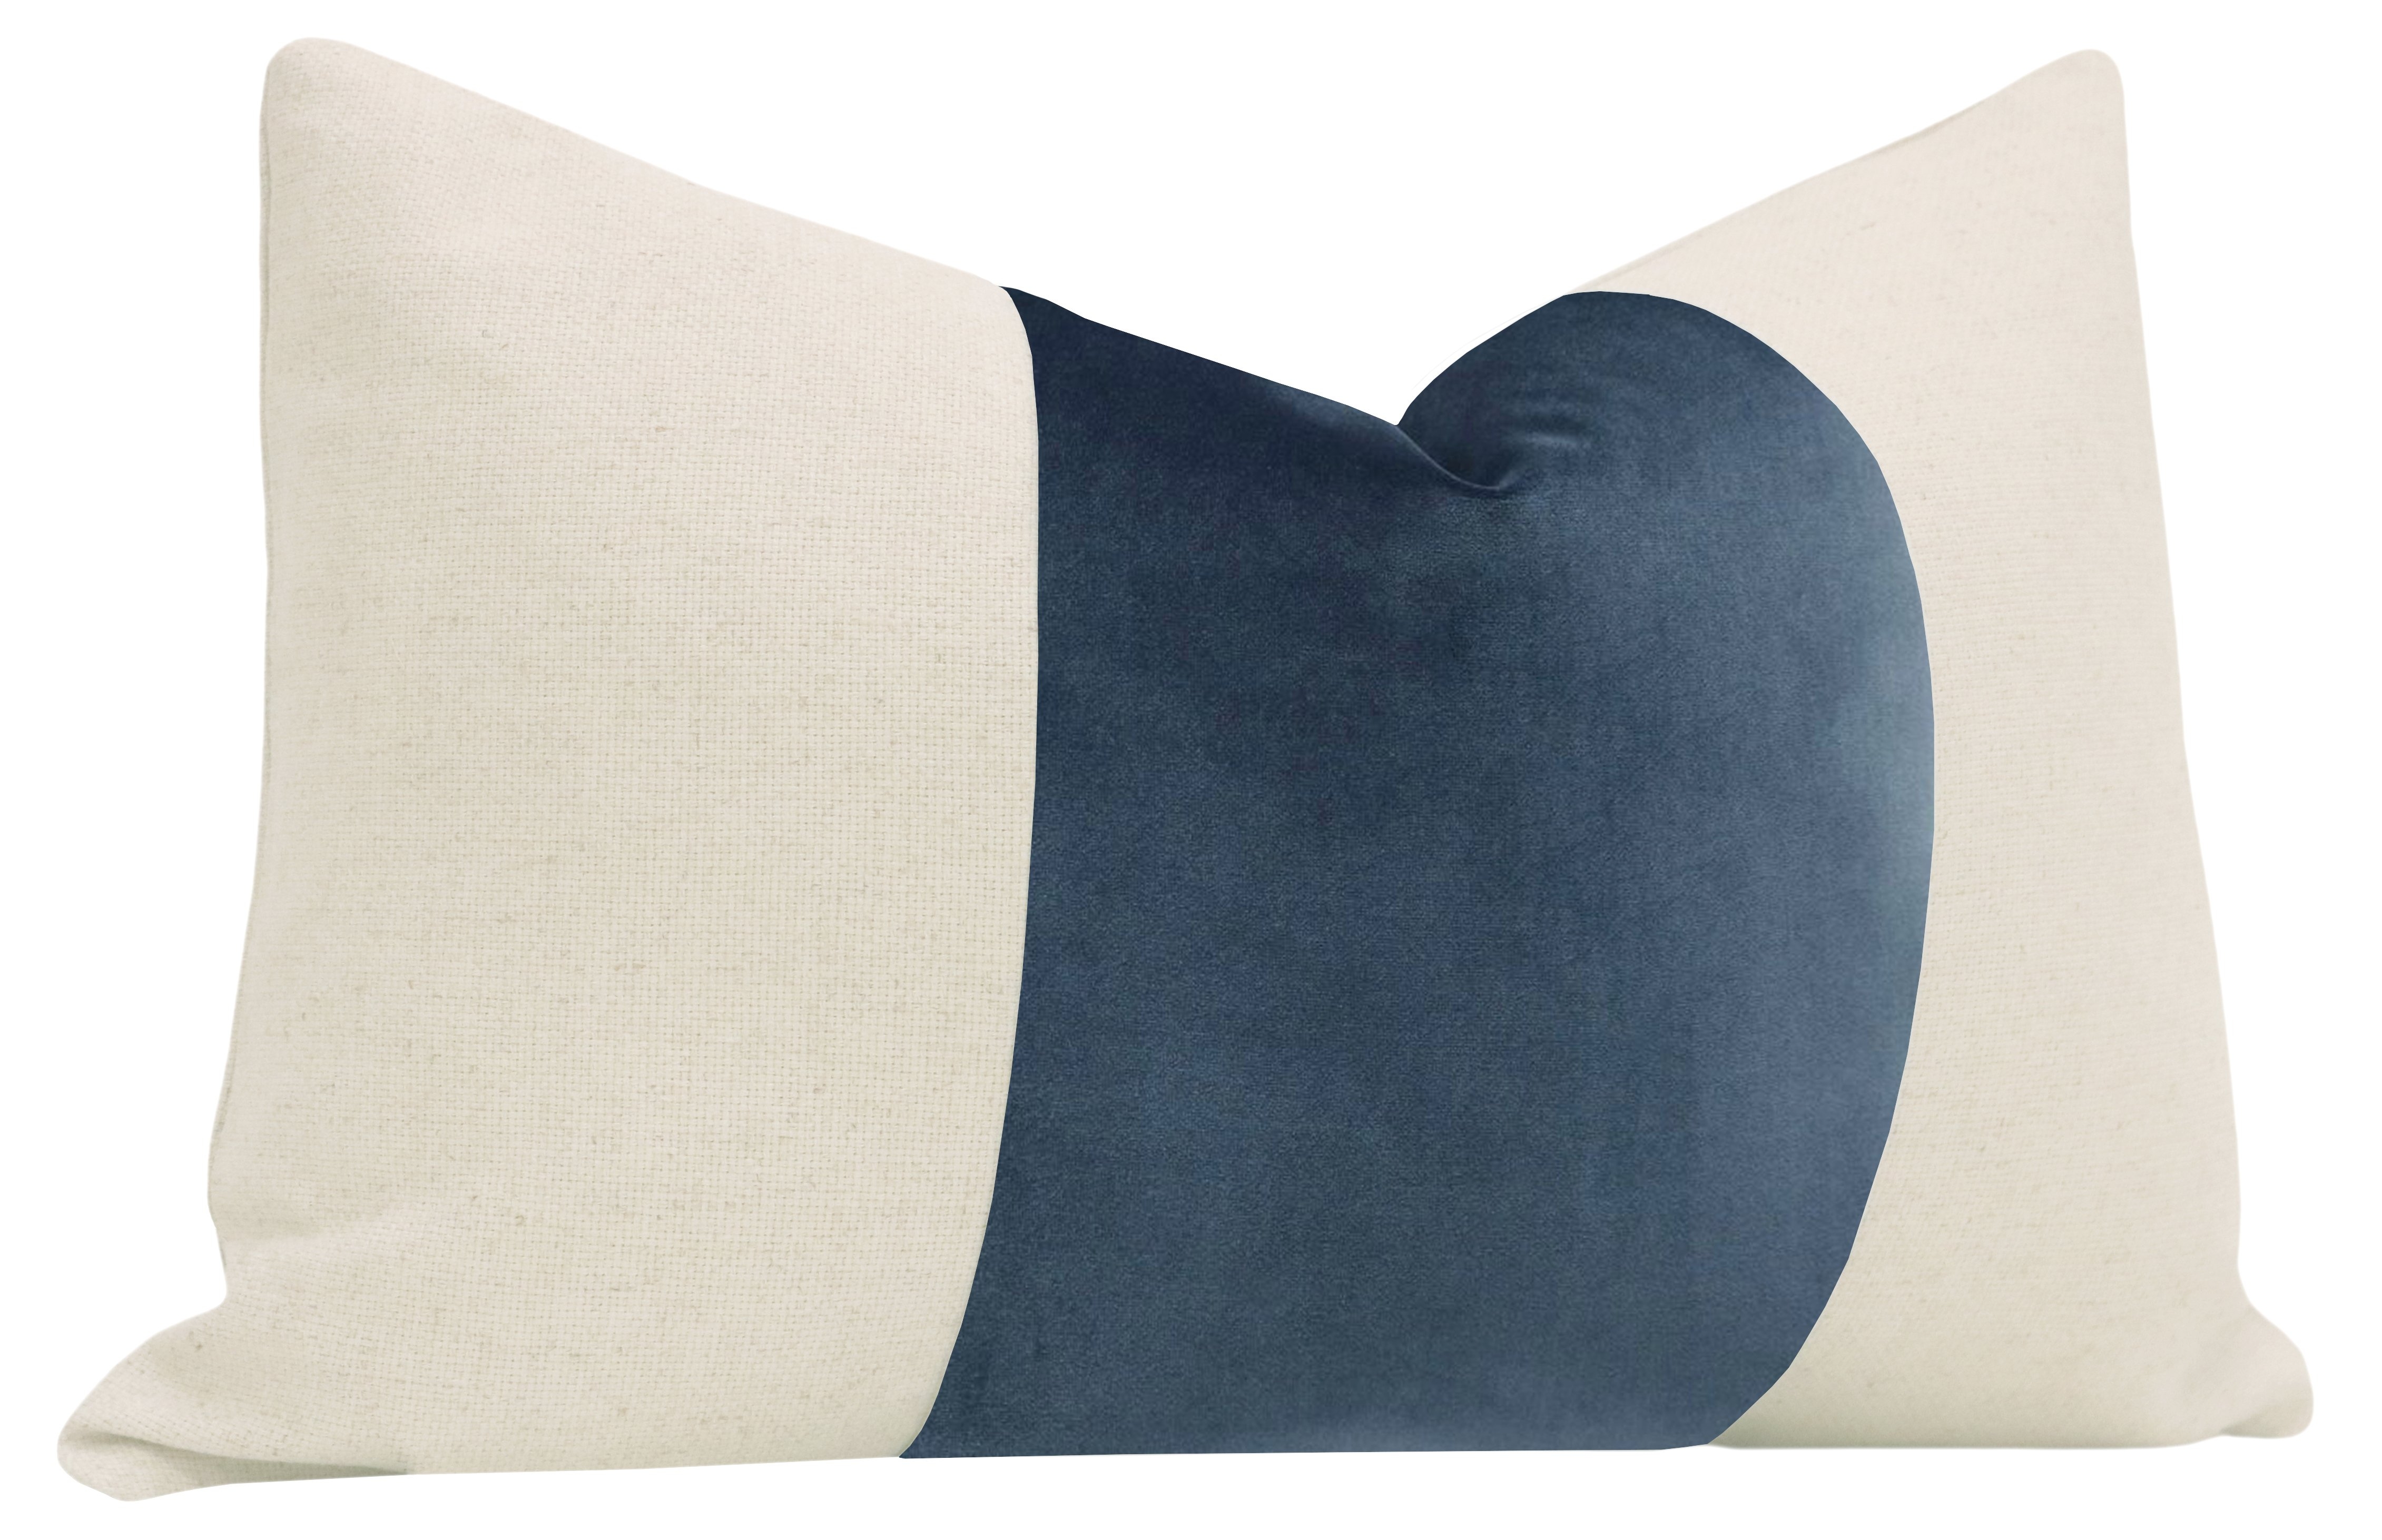 The Little Lumbar :: PANEL Signature Velvet //Prussian Blue - 12" X 18" (Insert Not Included, Cover Only) - Image 1